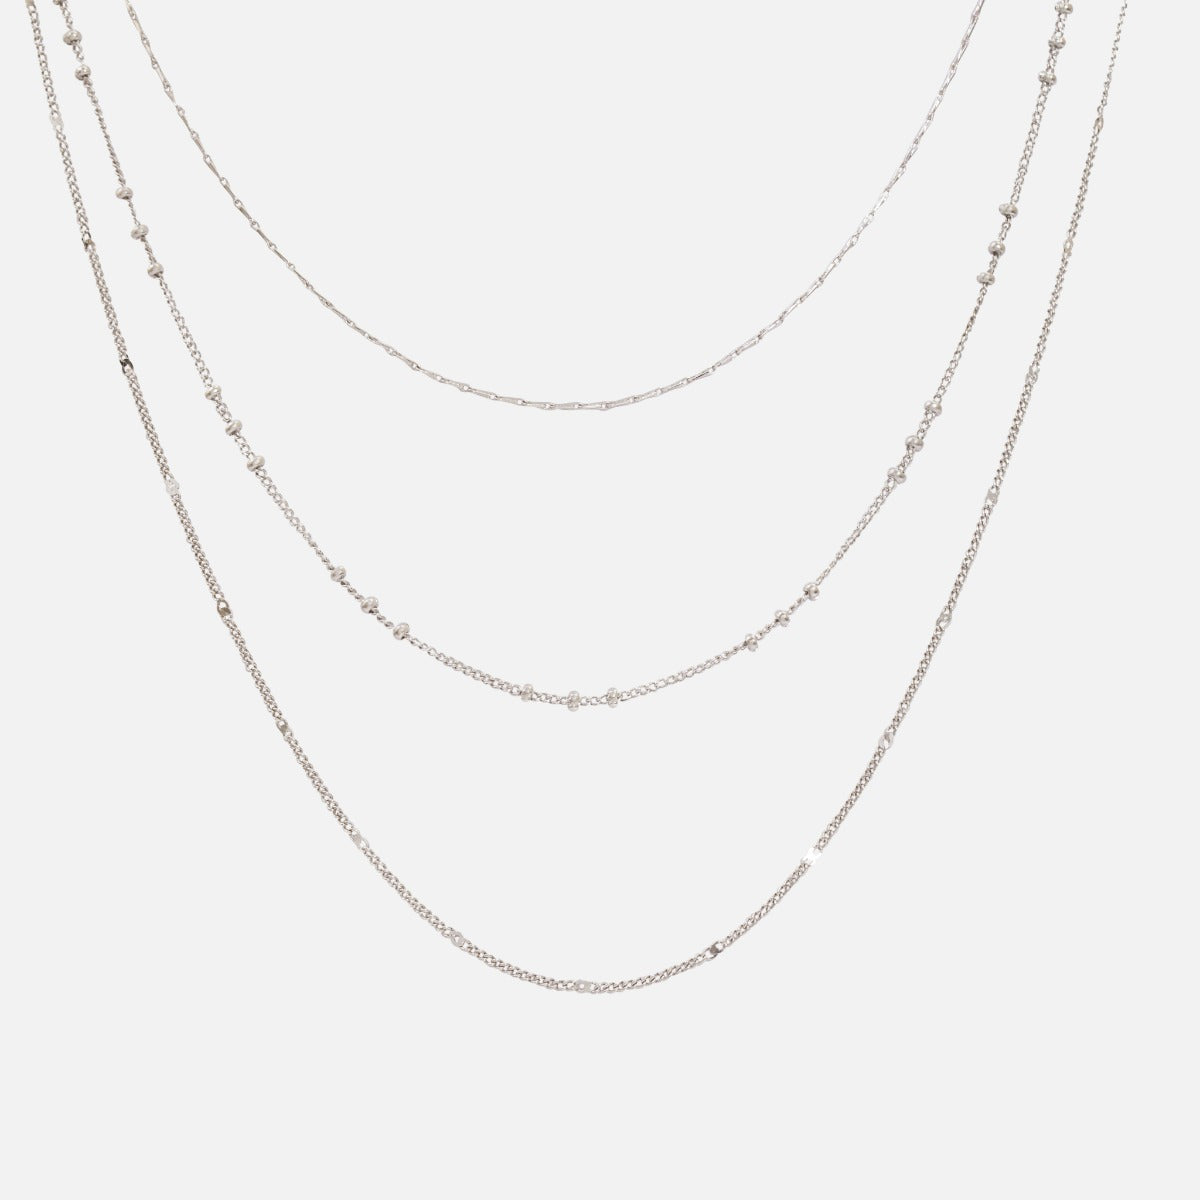 Necklace triple chains with delicate silver mesh